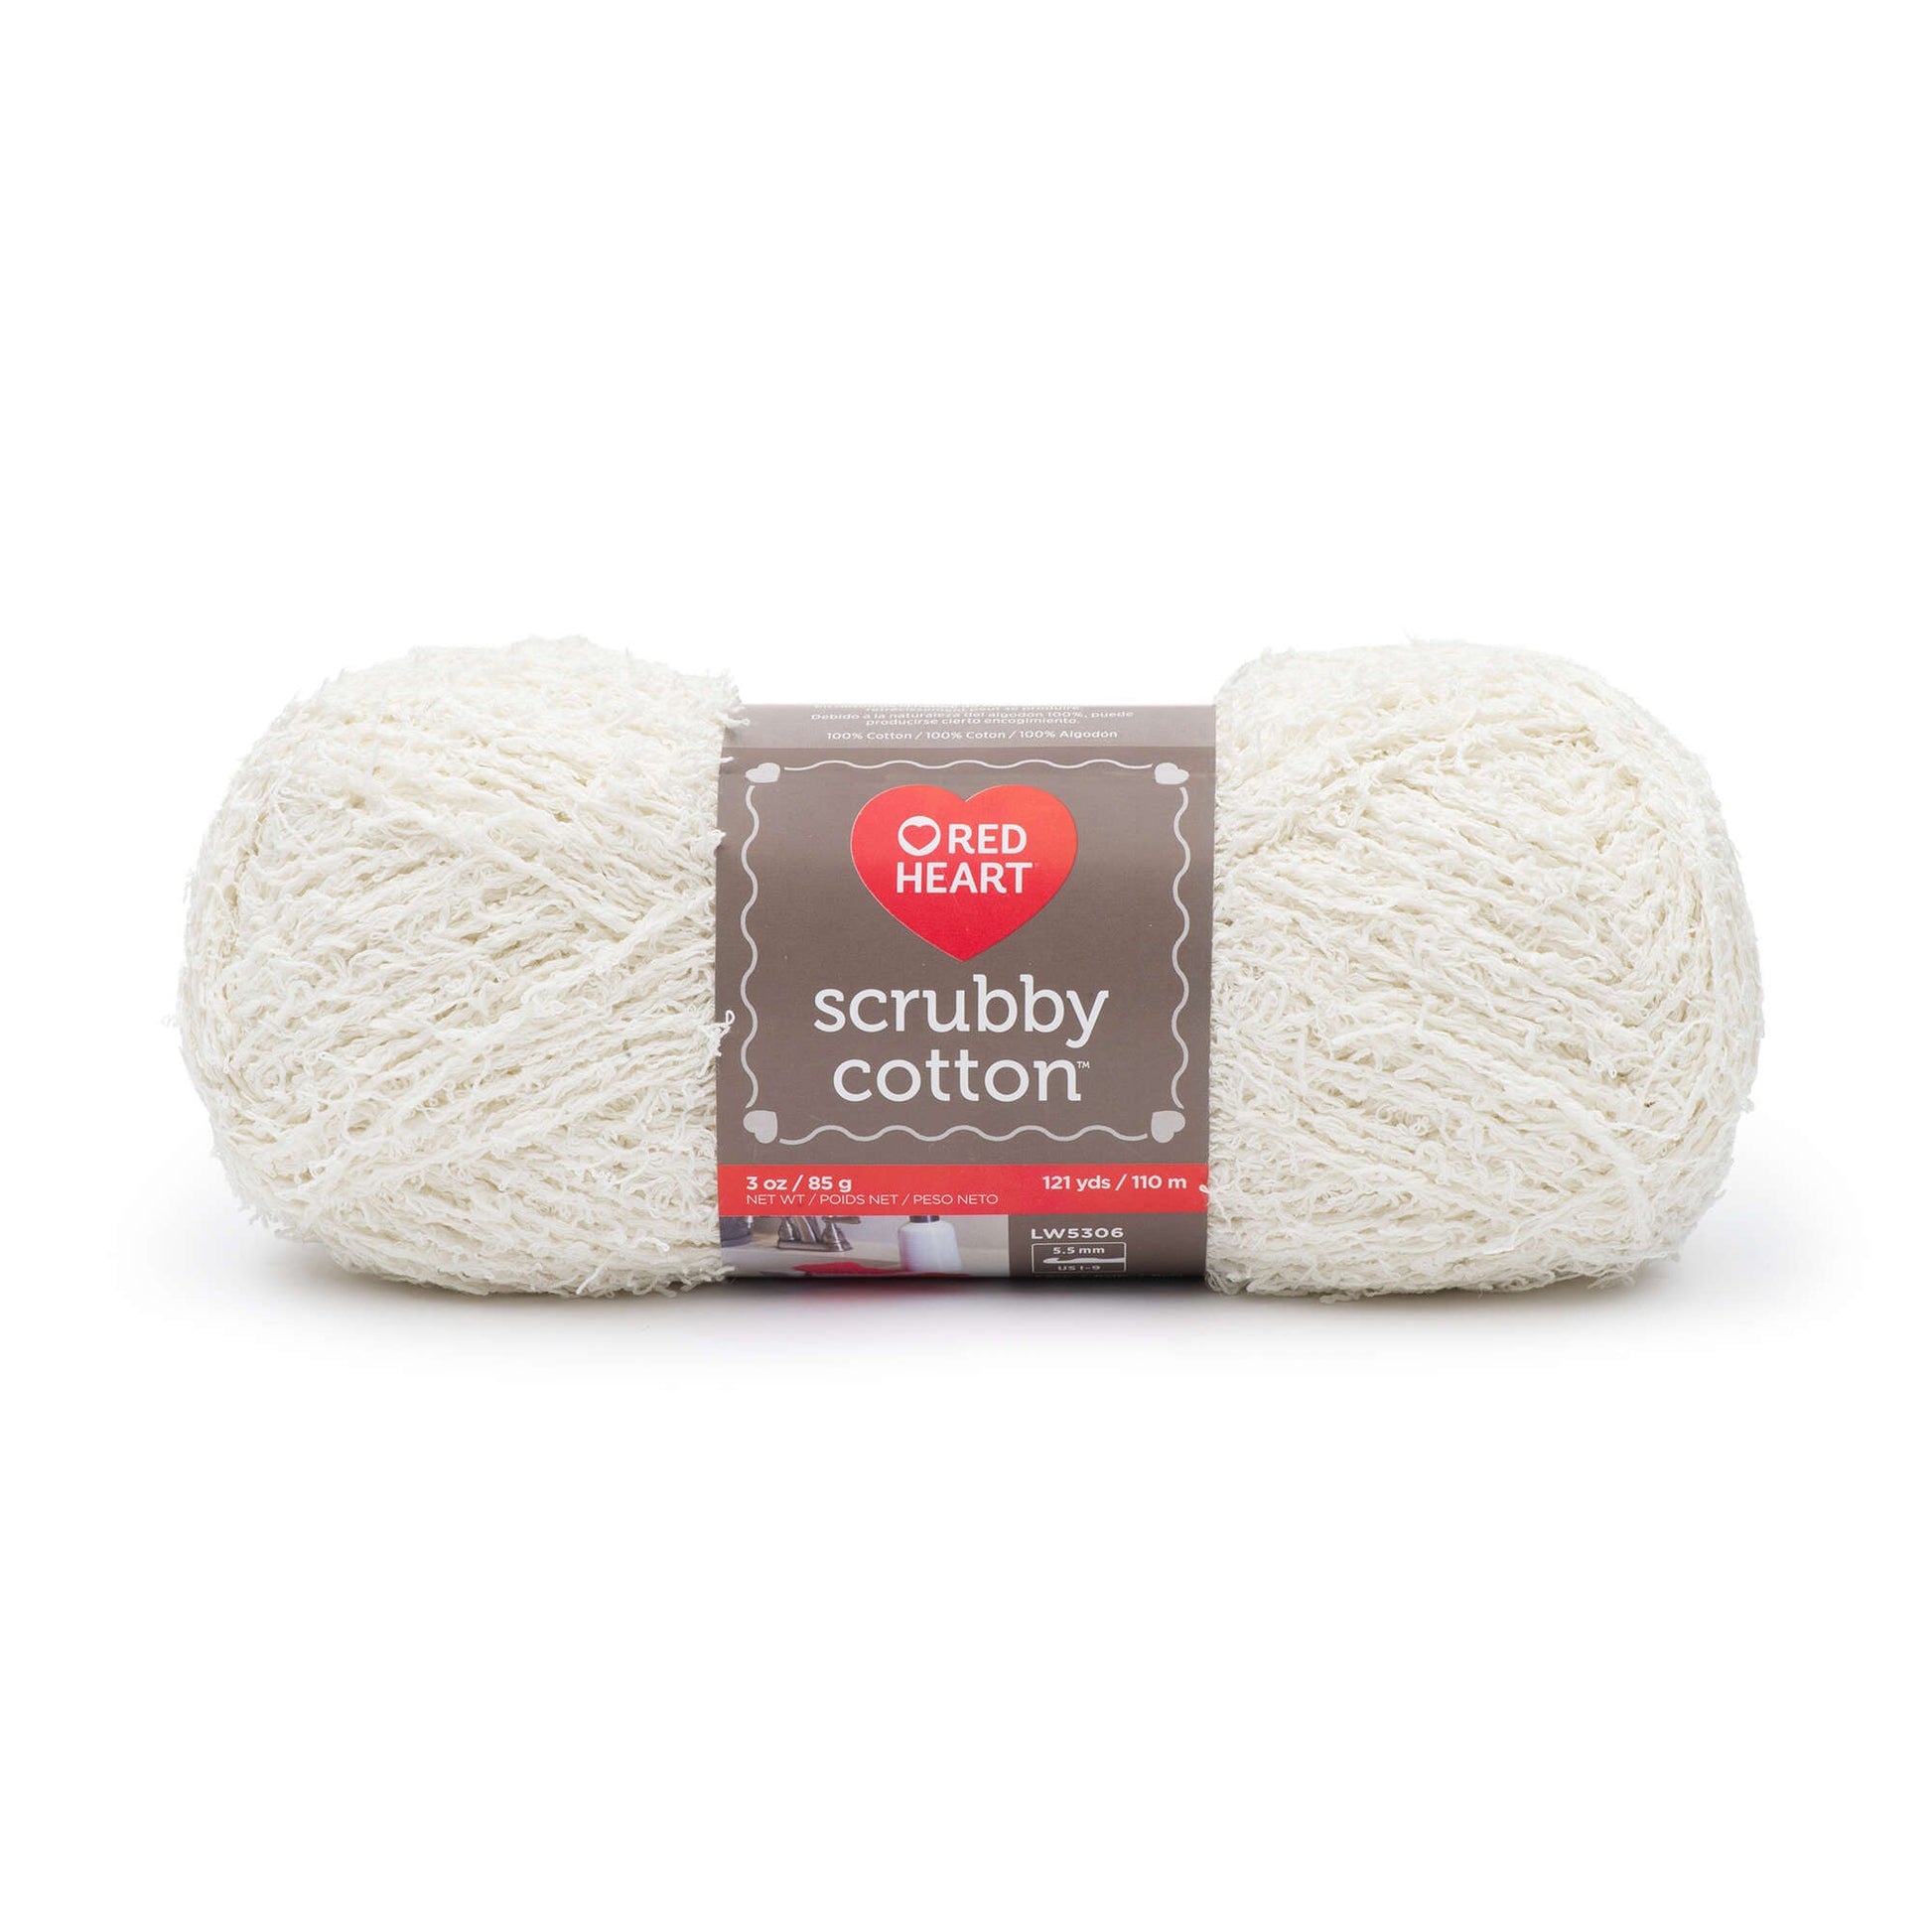 Red Heart Scrubby Cotton Yarn - Discontinued shades Loofa